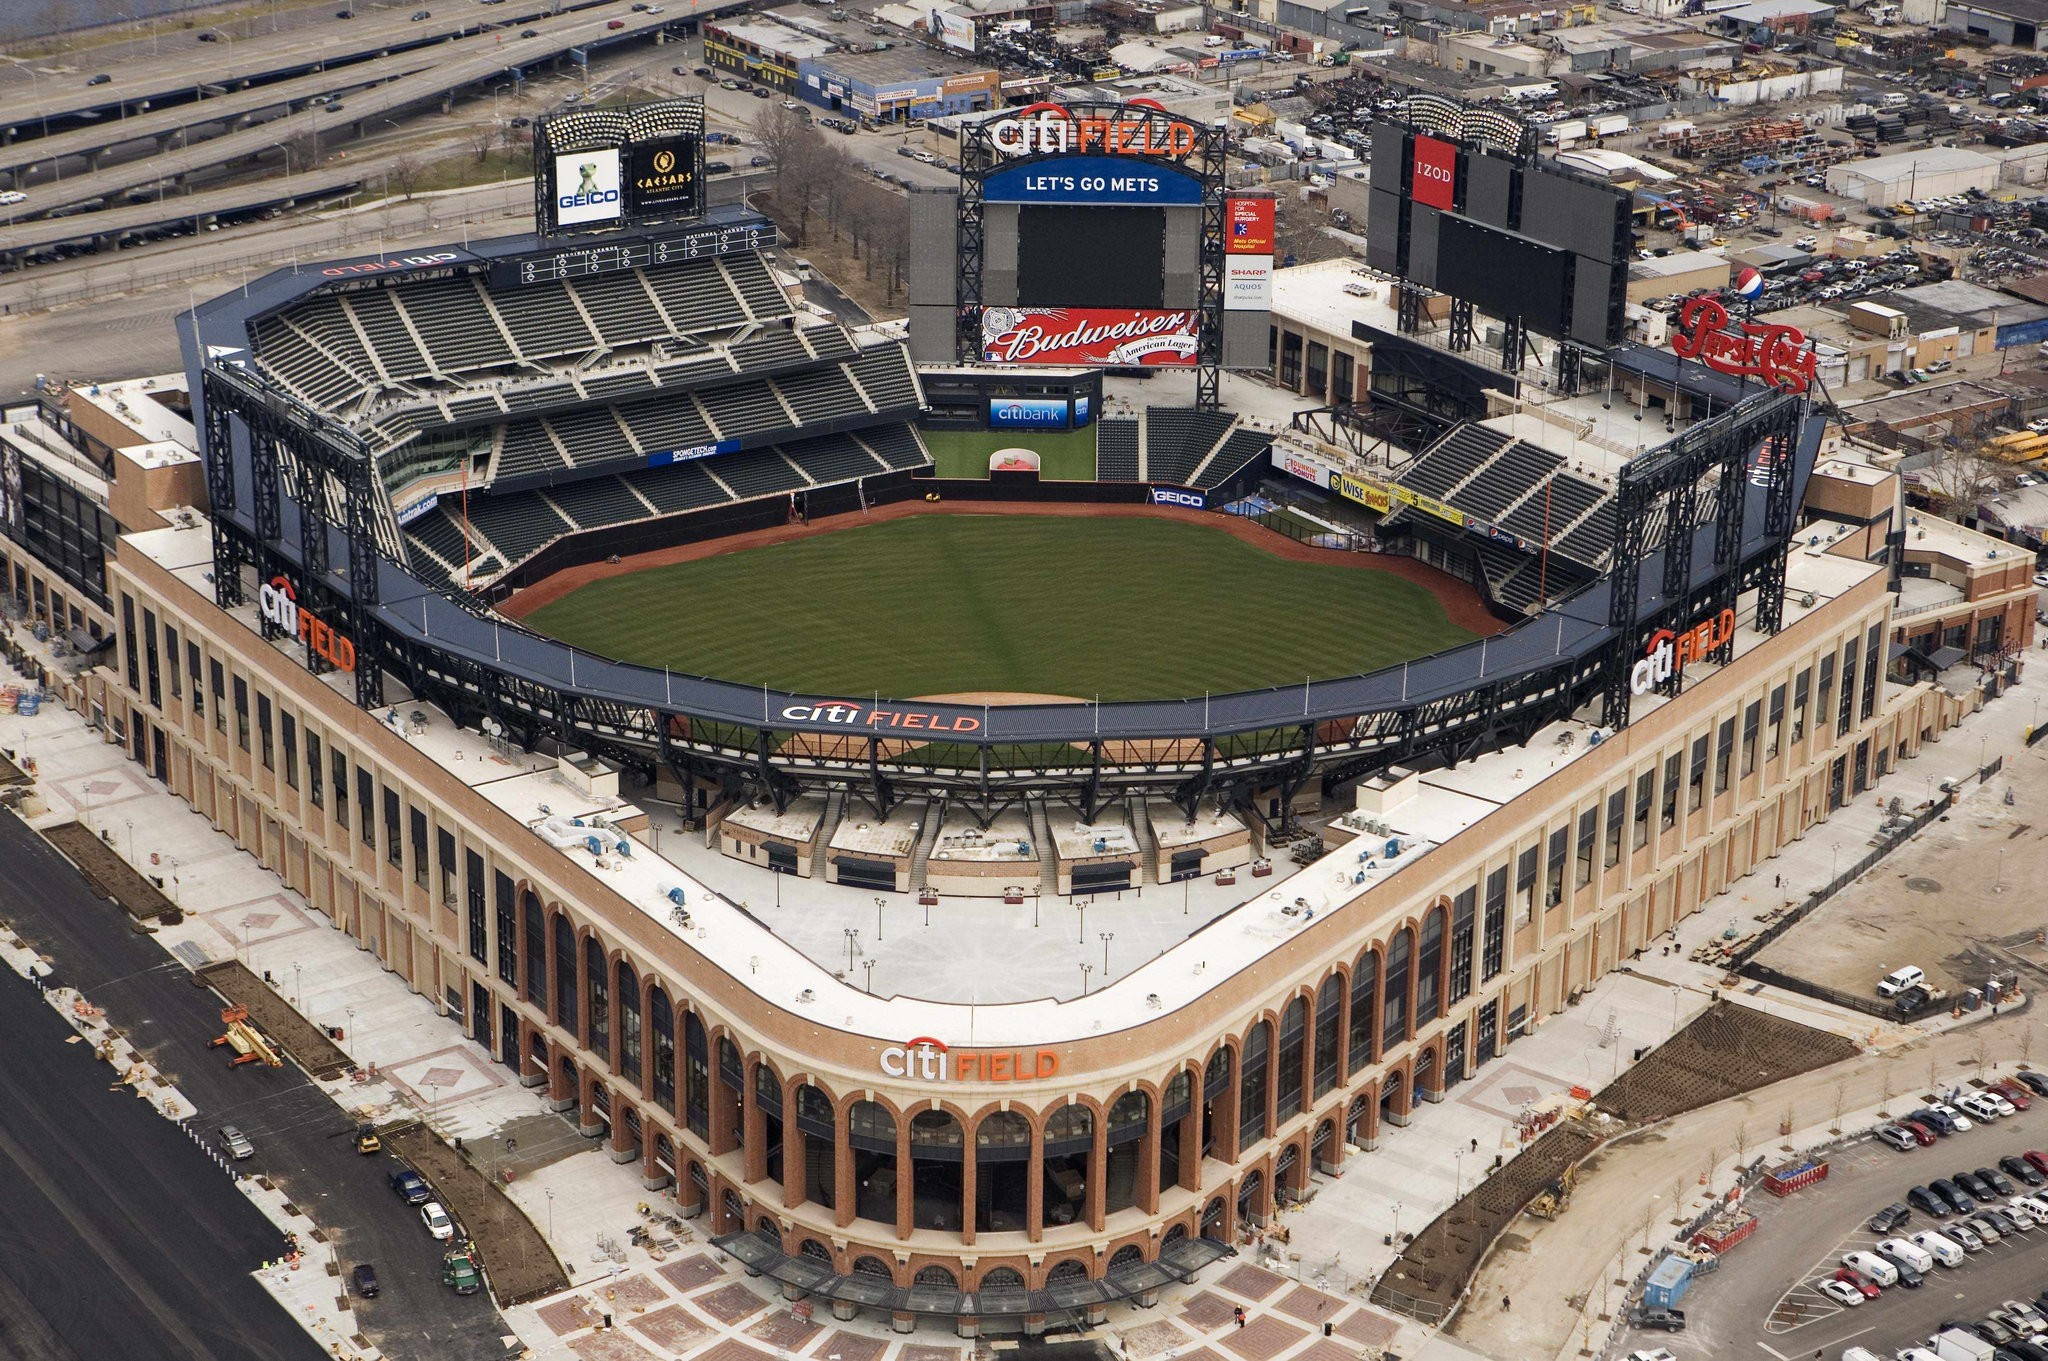 2048x1361 Feds OK highway ramps near Citi Field, giving Mets fans and developers a boost